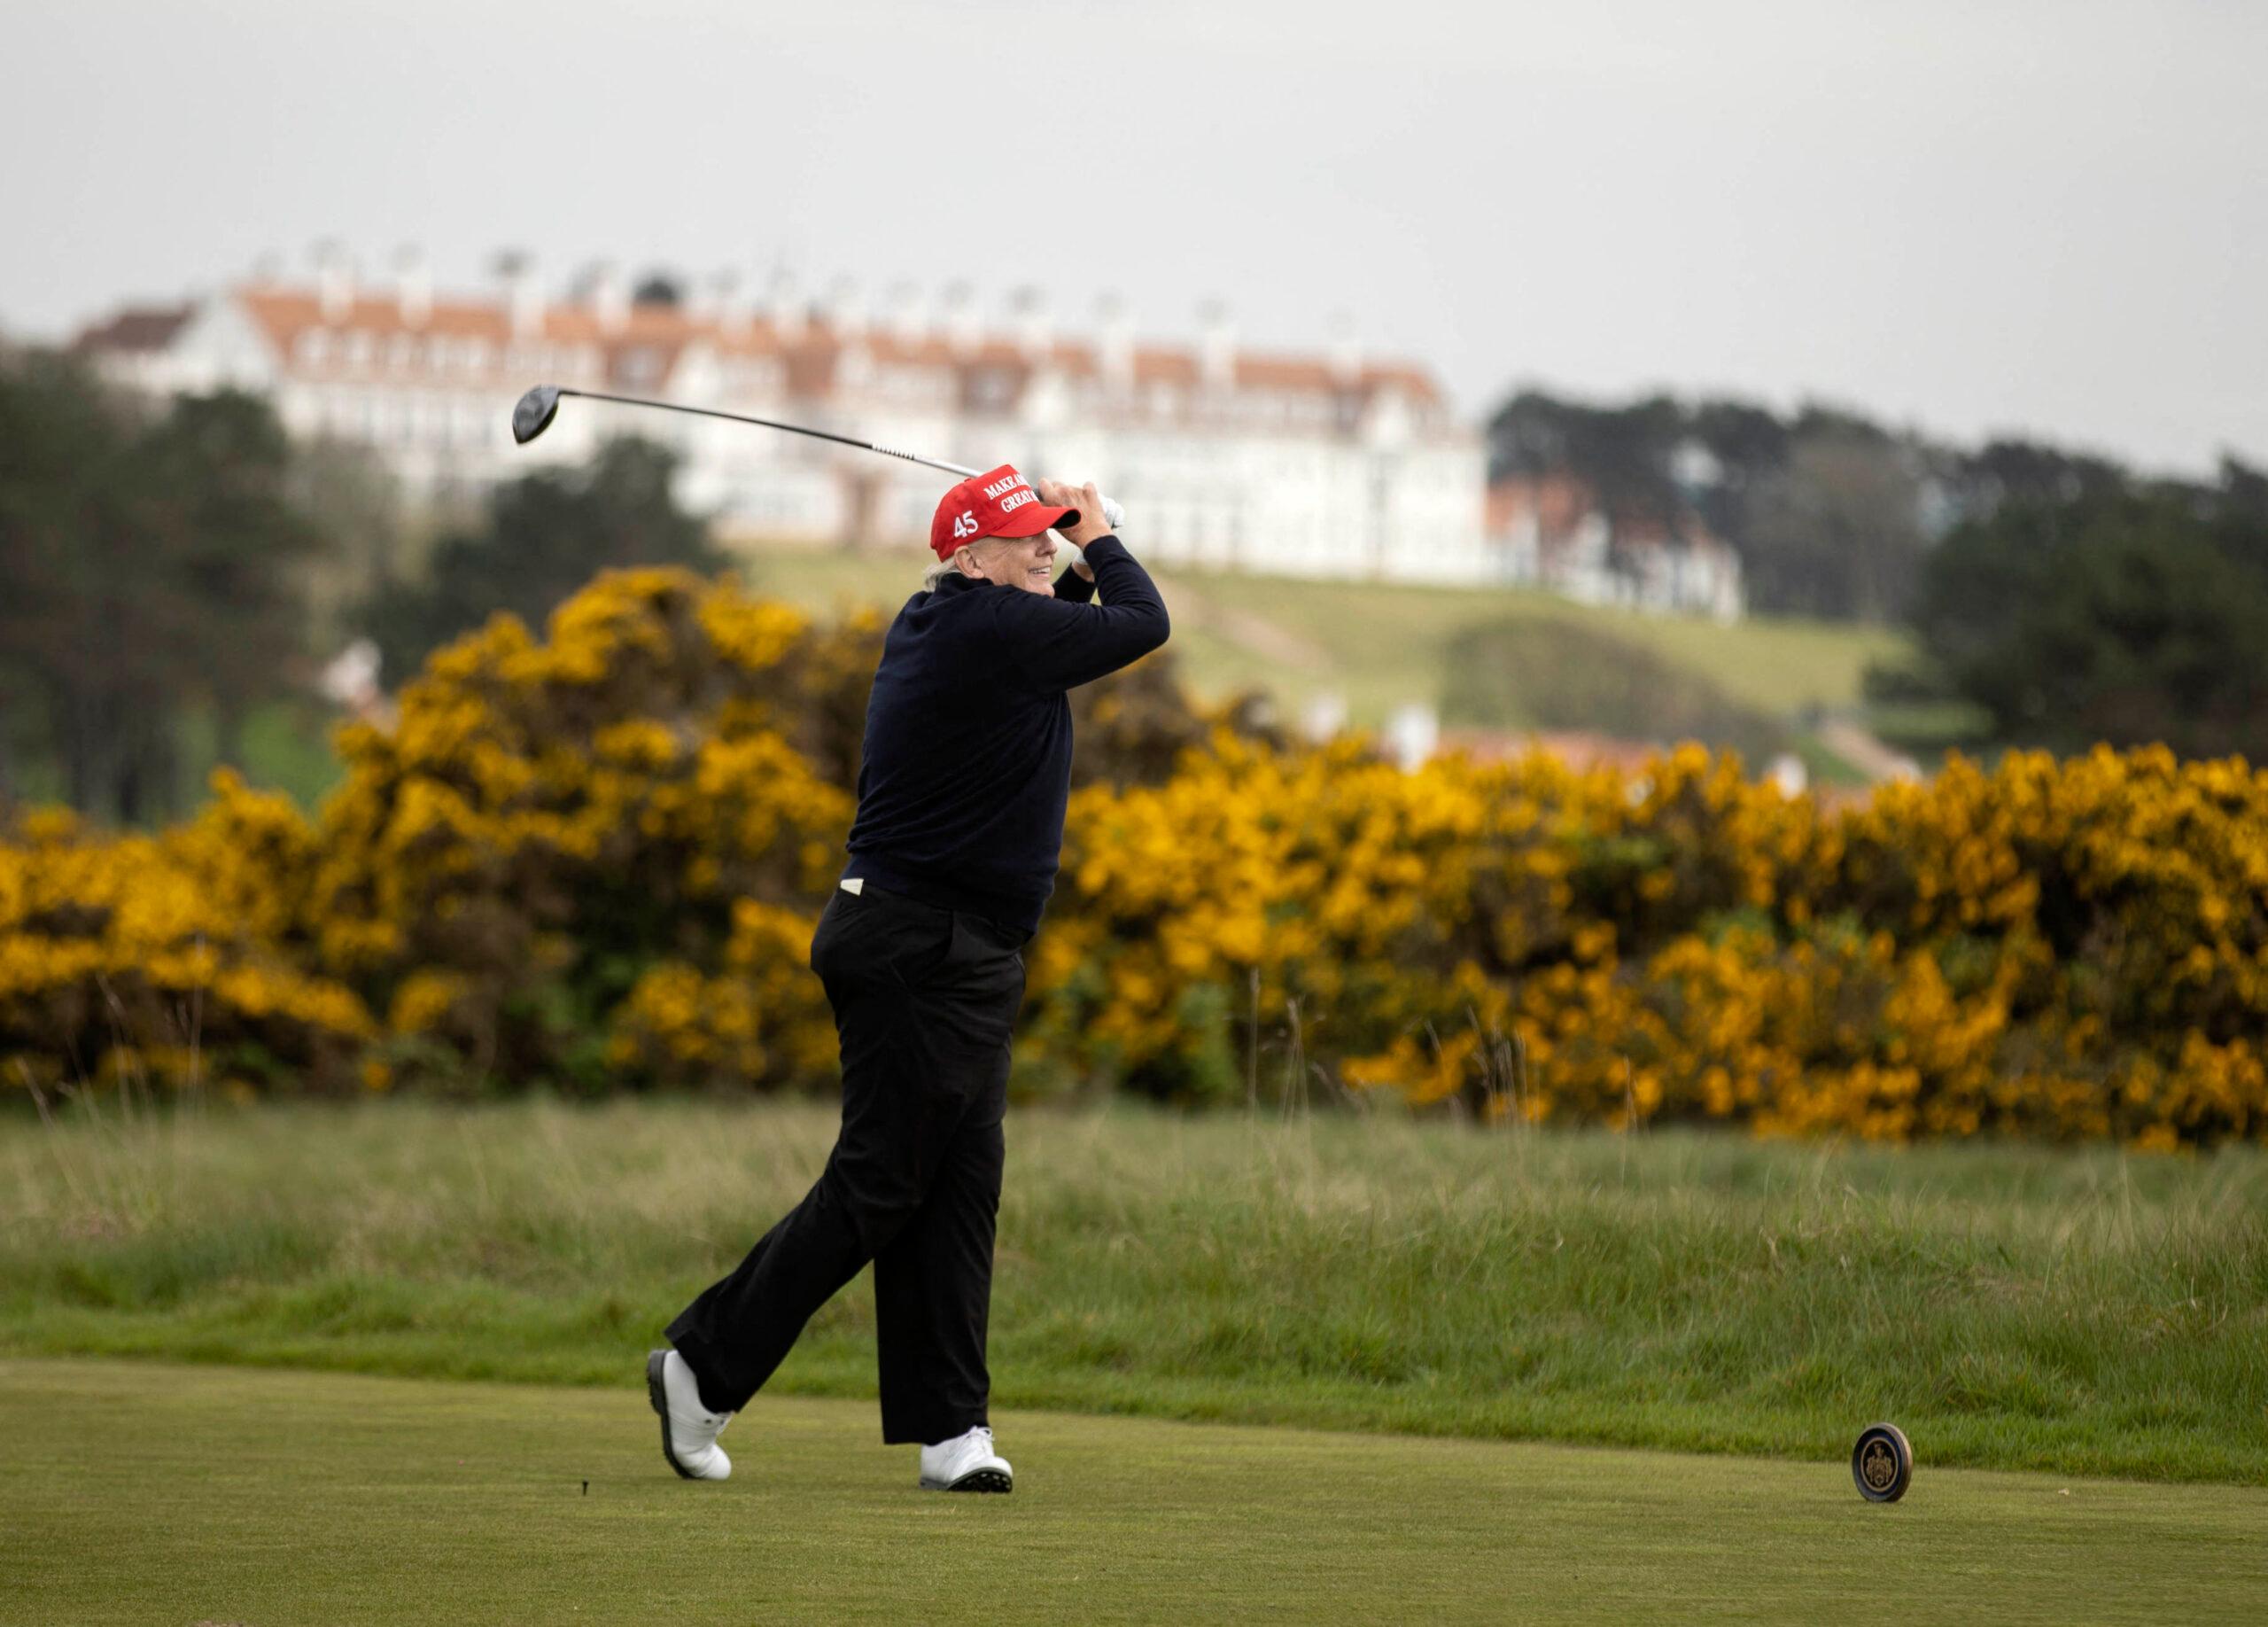 Donald Trump playing golf at his Trump Turnberry resort in South Ayrshire